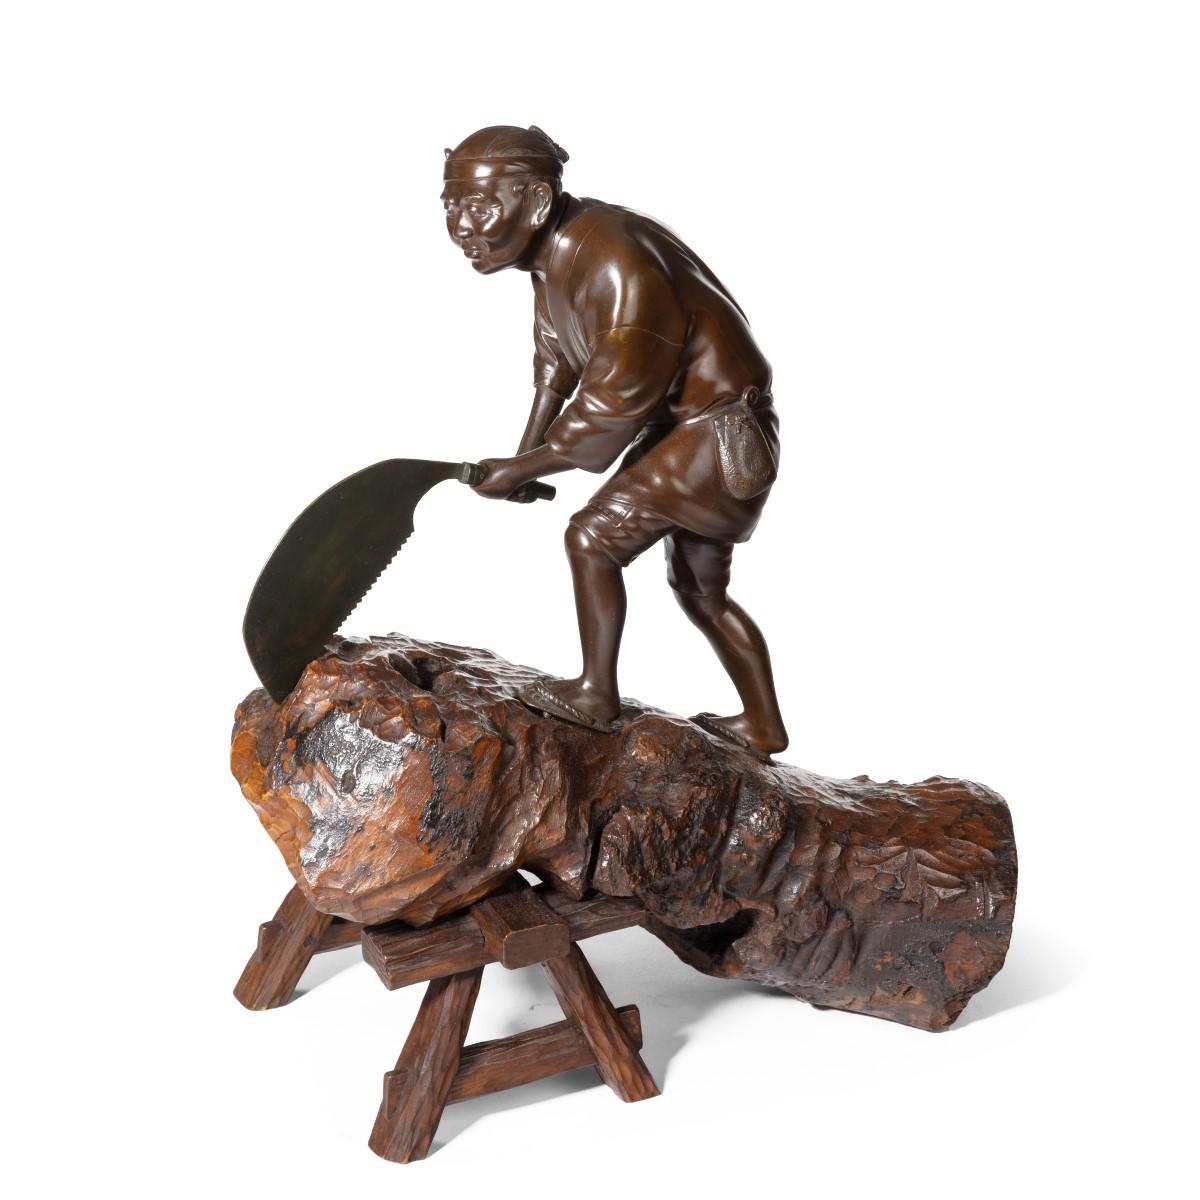 Late 19th Century 19th Century Meiji Period Bronze of a Woodcutter Sawing a Large Tree Trunk